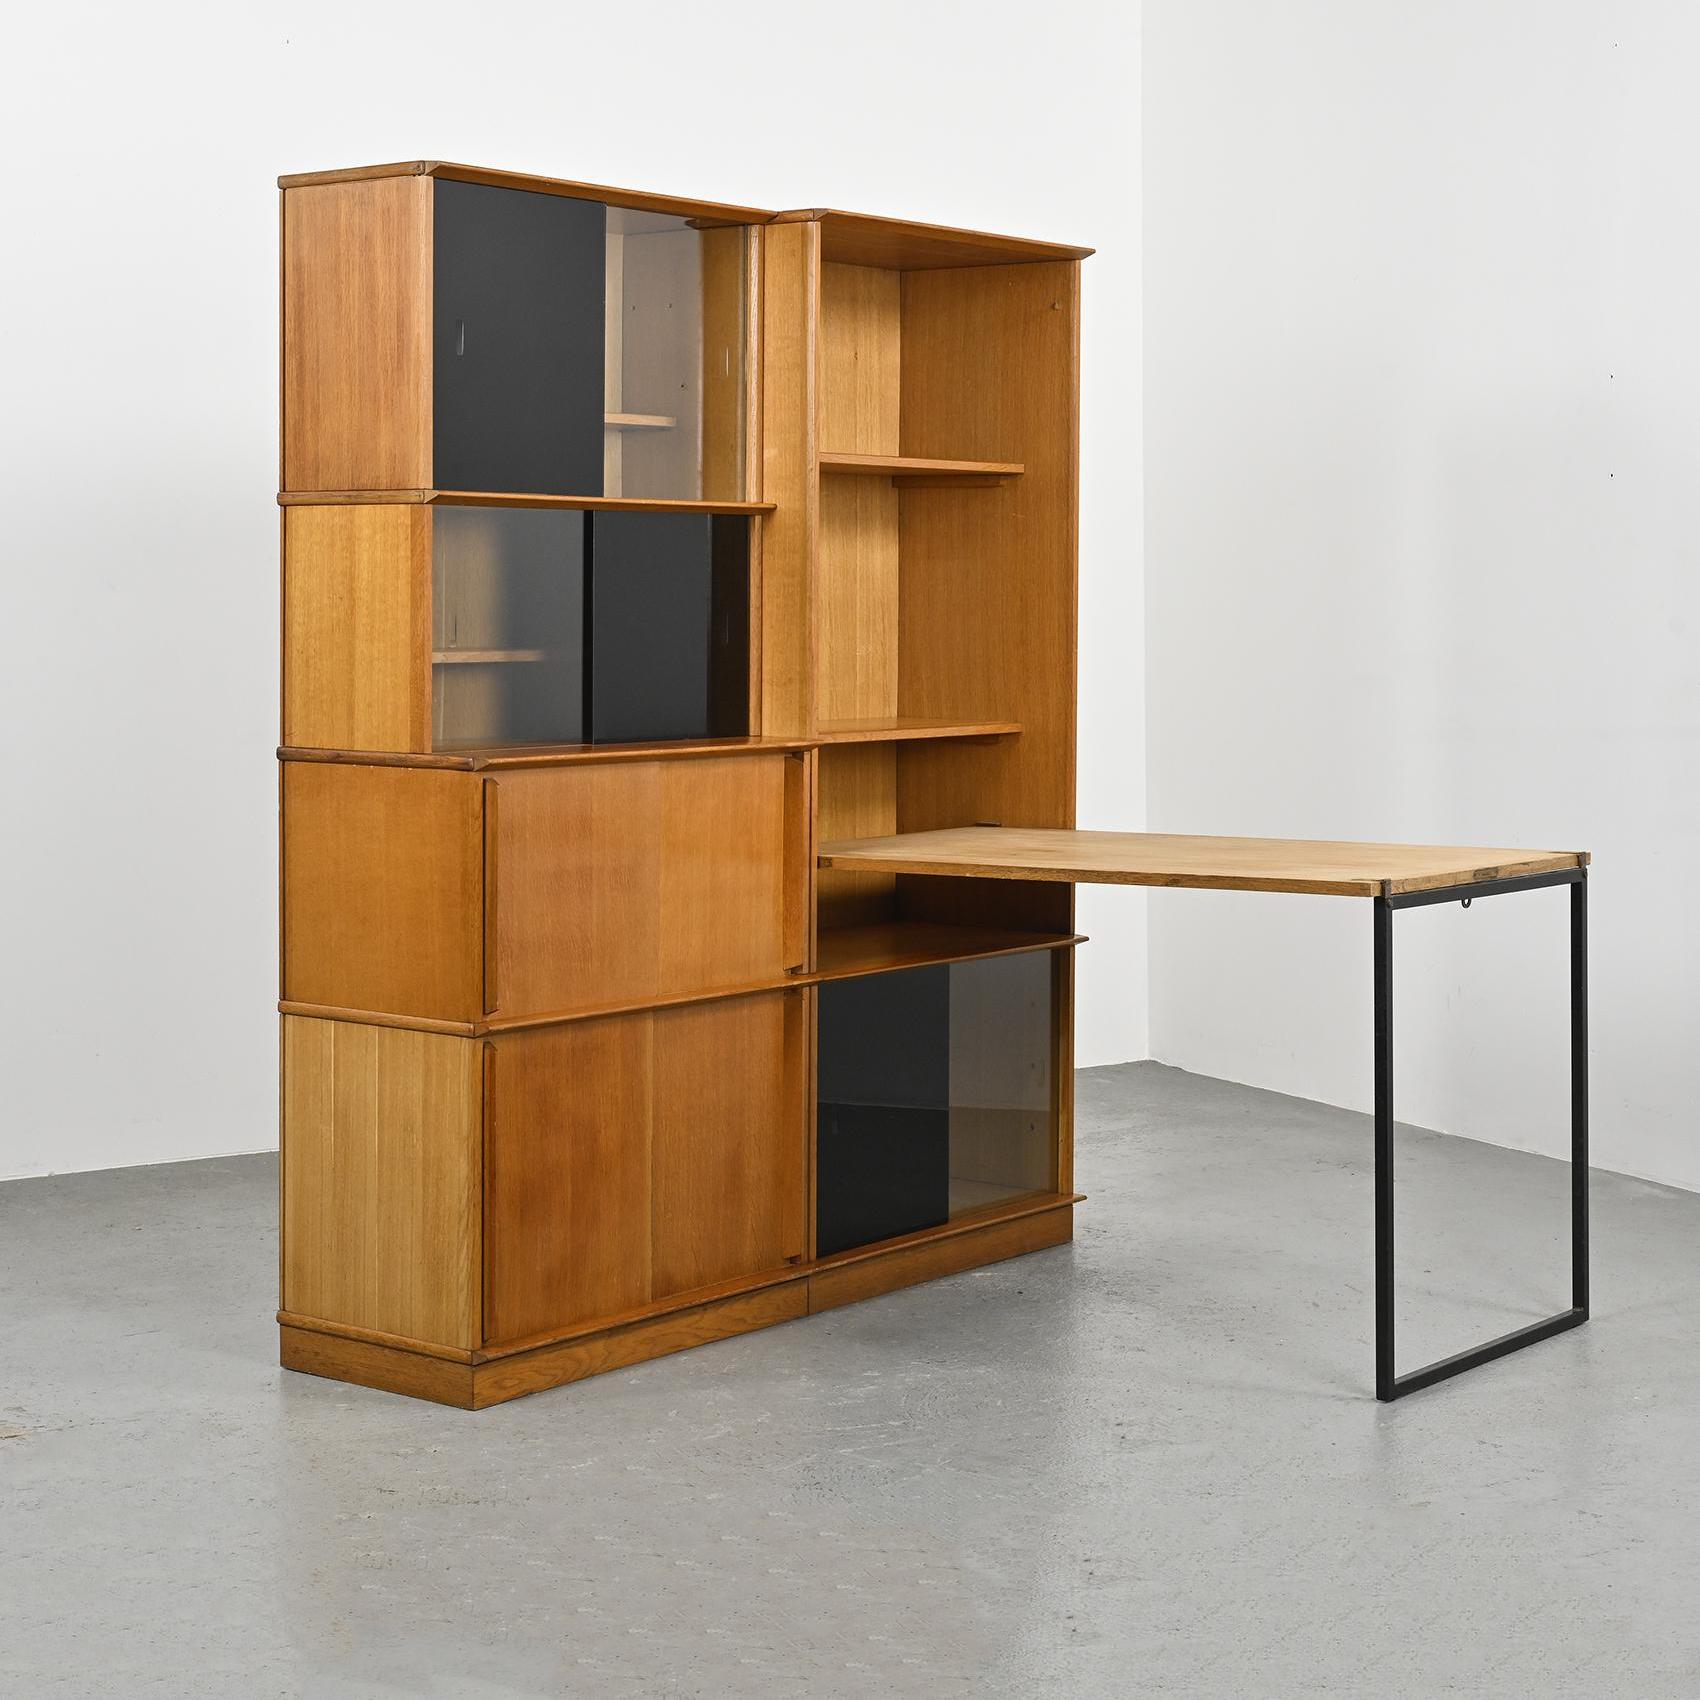 Library-desk dating from the 1950s, by Didier Rozaffy for the French manufacturing company Oscar, libraries, and modular furniture.

At that time, Oscar furniture was innovative and characterized by its adaptability, with elements that could be